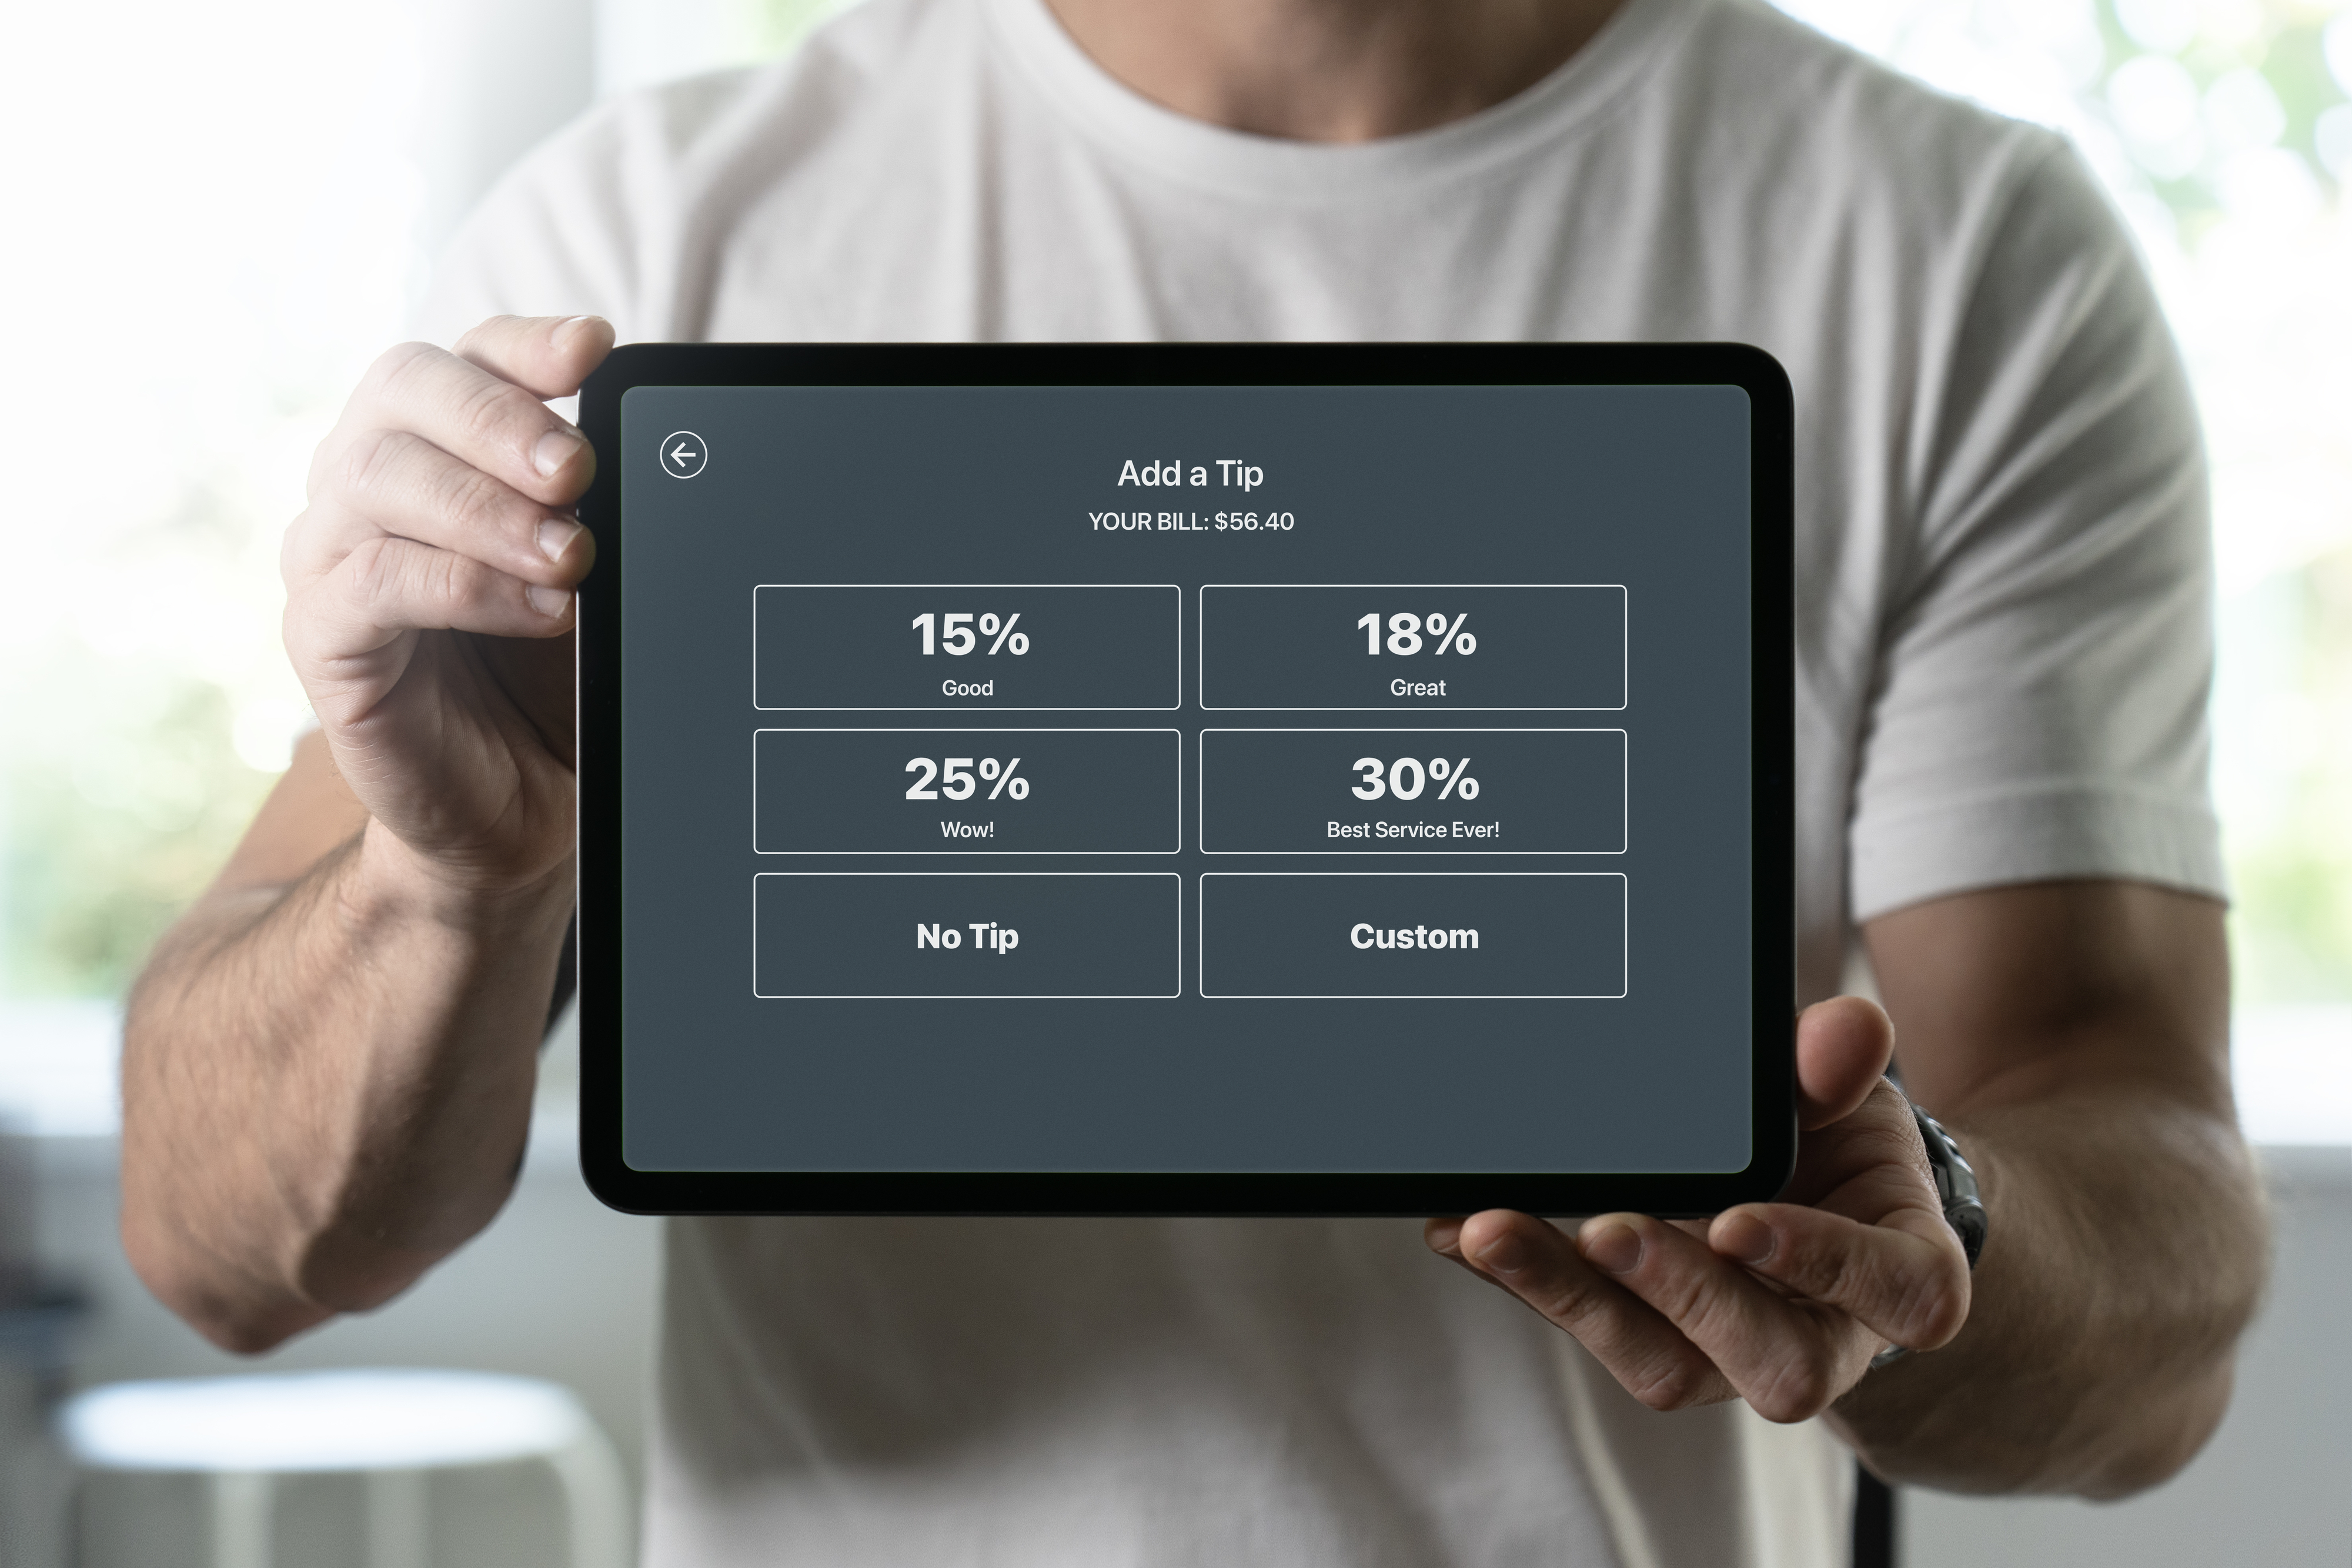 A person holds a tablet displaying a tip selection screen for a $56.40 bill, with options for 15%, 18%, 25%, 30%, no tip, and custom tip amounts